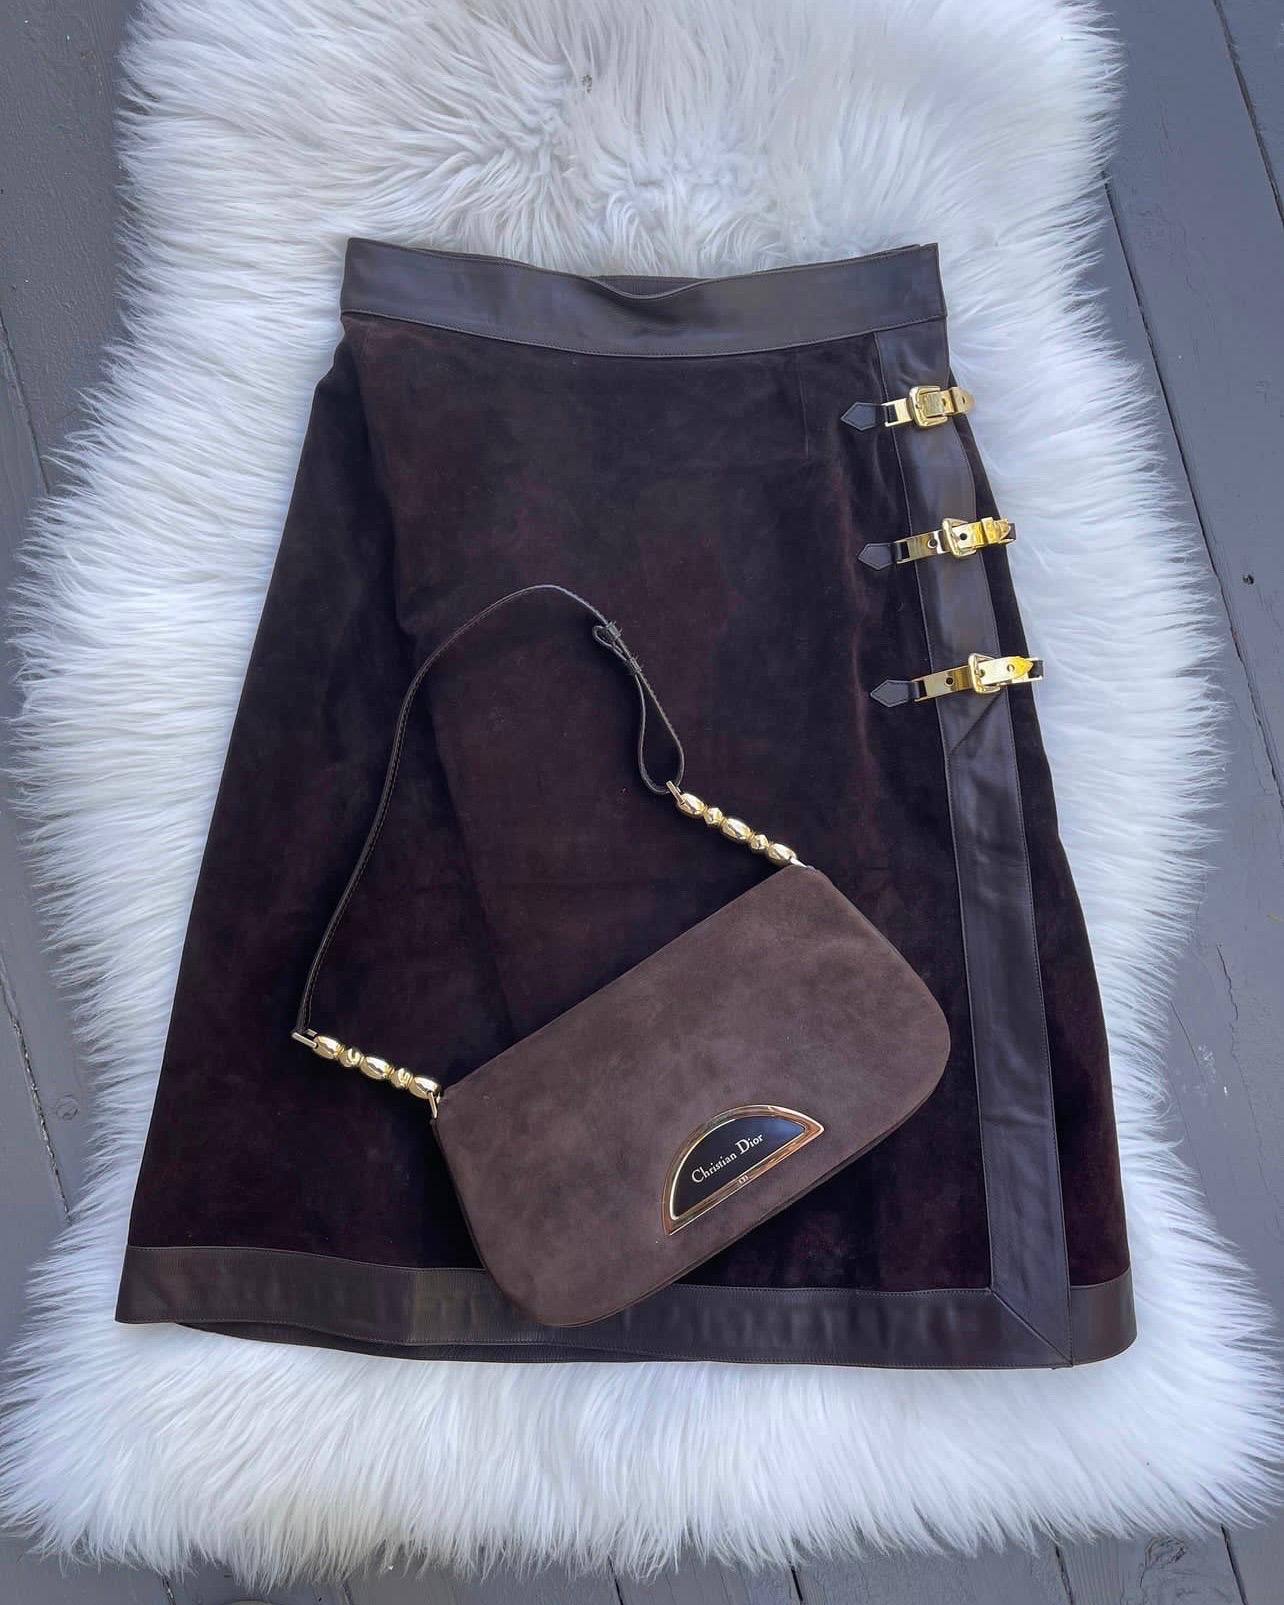 Vintage Christian Dior Malice bag 
*includes Authenticity Card

Christian Dior logo monogram on front inlay and CD stamped on hardware. 
Gold tone hardware with brown strap / interior
Tuck in the strap and you can carry it as a clutch. 
NOTE: straps